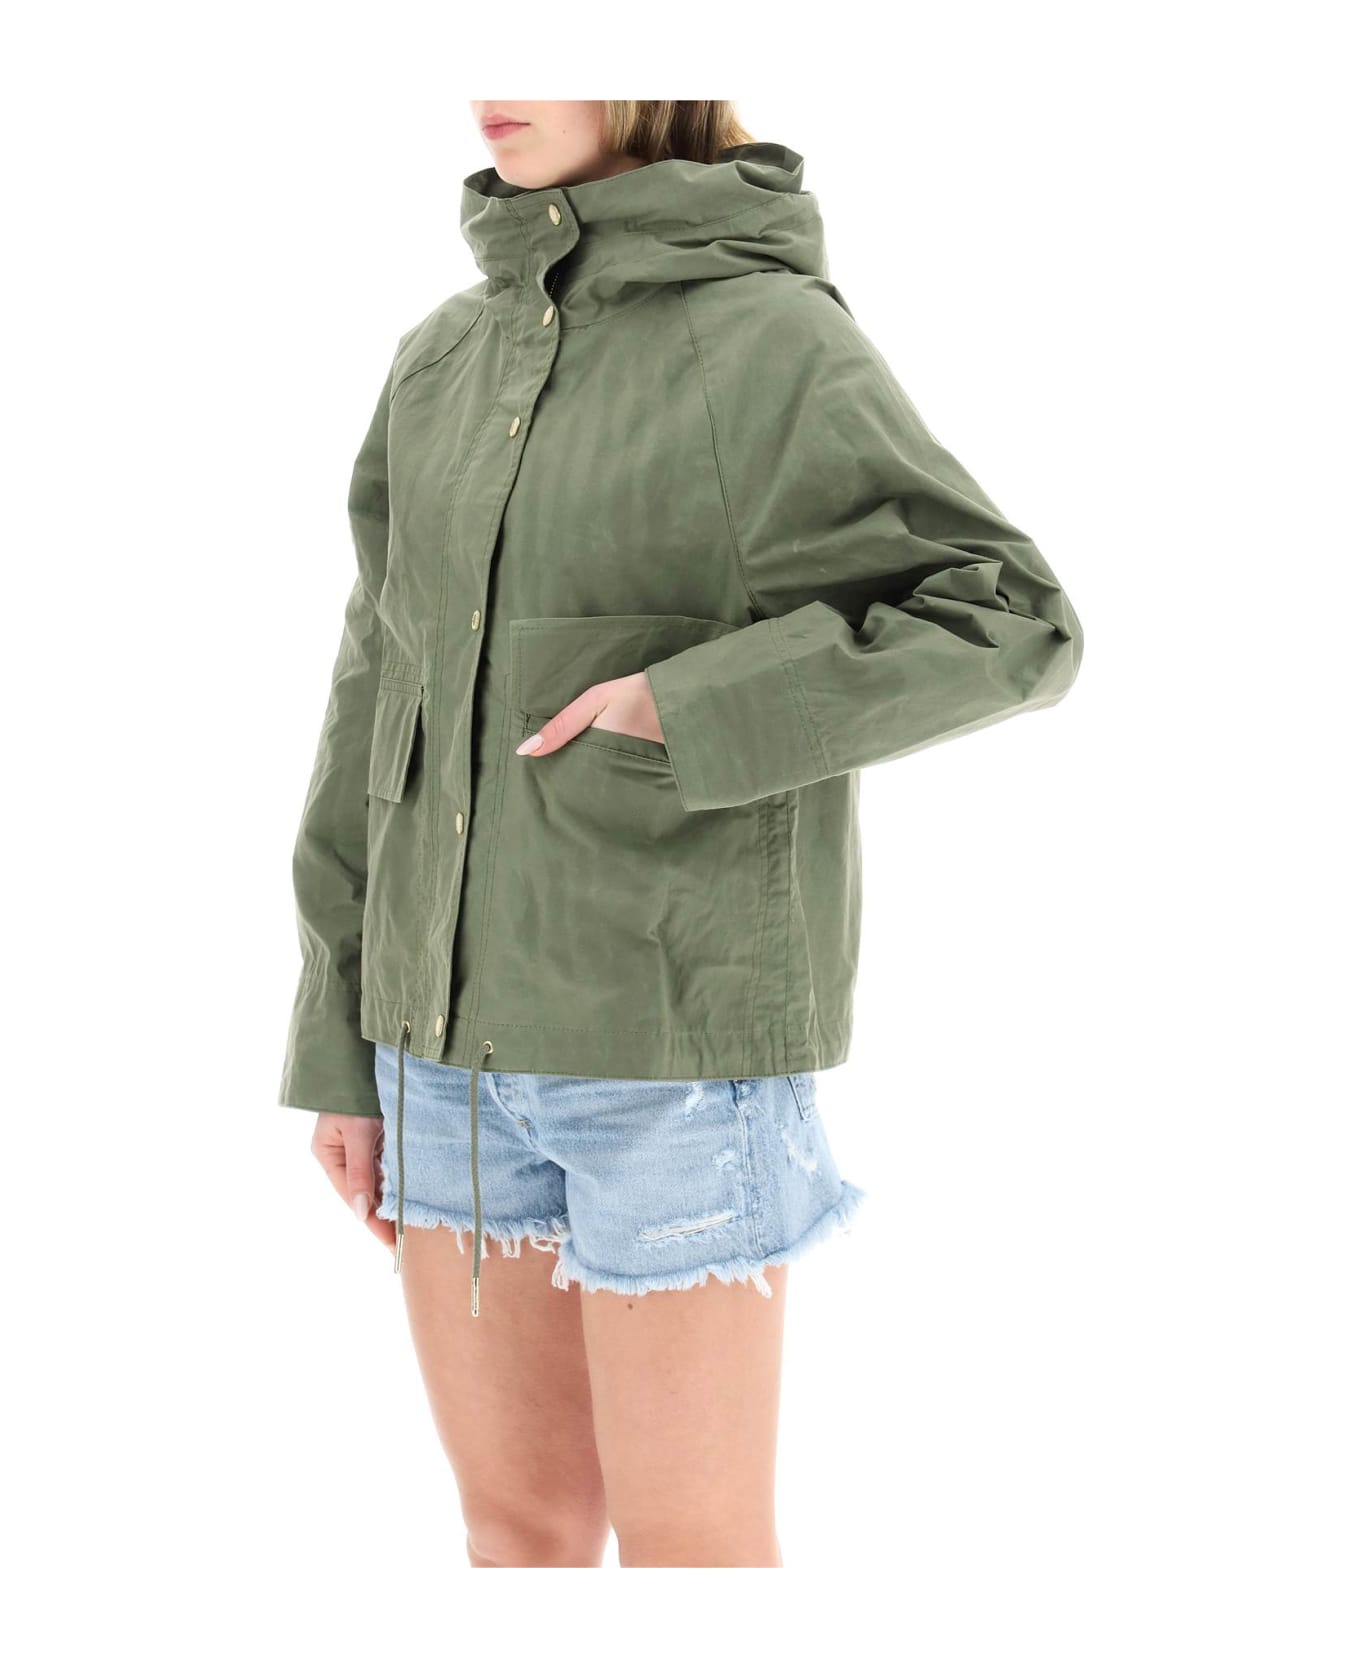 Barbour Nith Hooded Cotton Jacket - green ジャケット